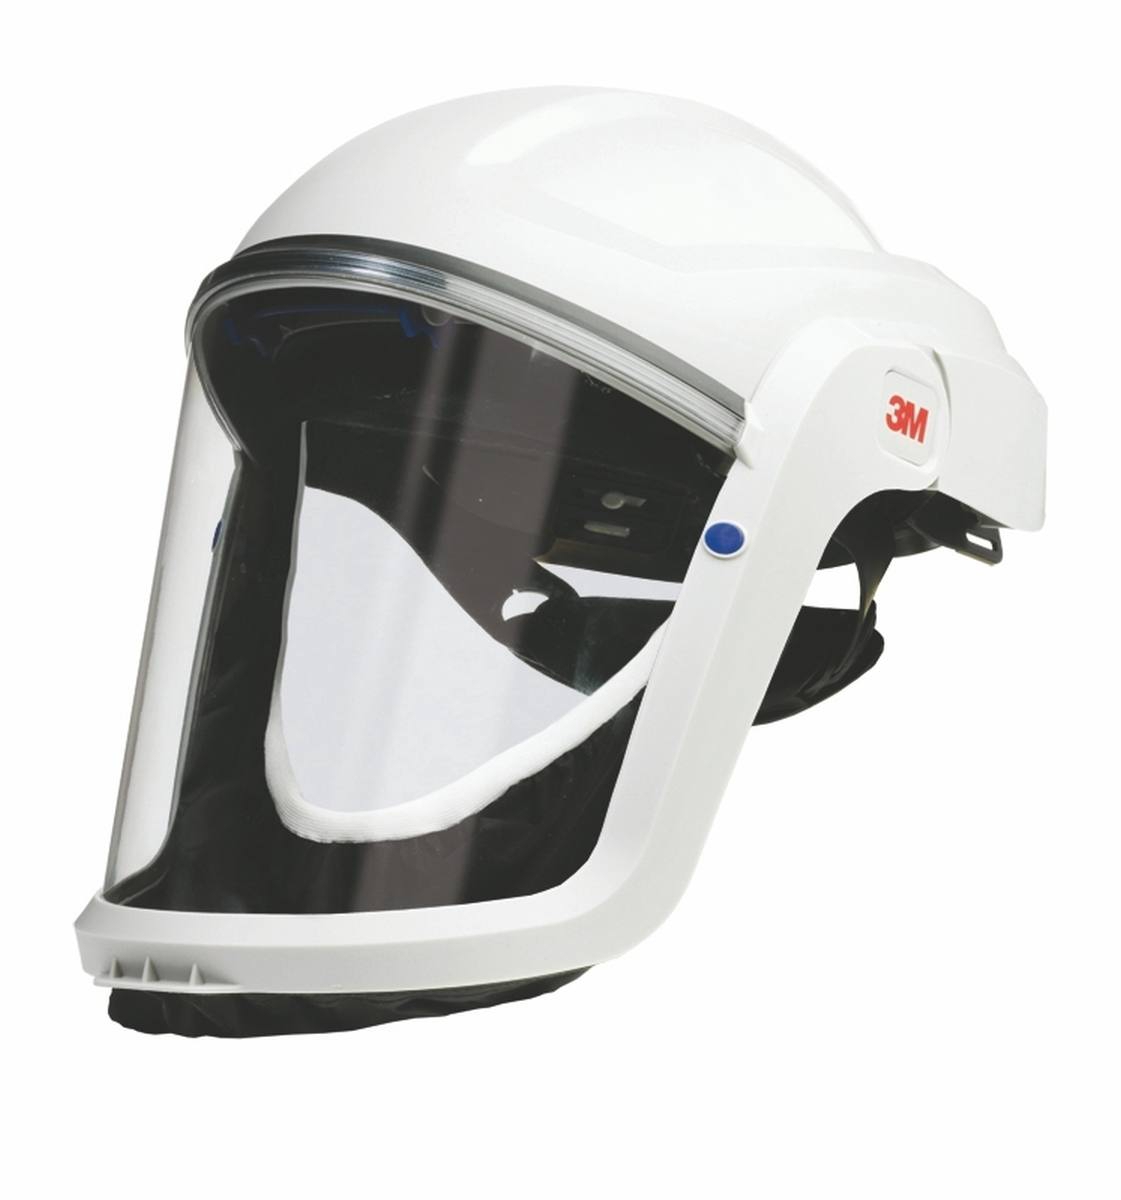 3M TR-619+ Versaflo starter pack incl. TR-602E, accessories and 3M Versaflo Safety helmet M207 with flame-retardant face seal and polycarbonate visor, clear